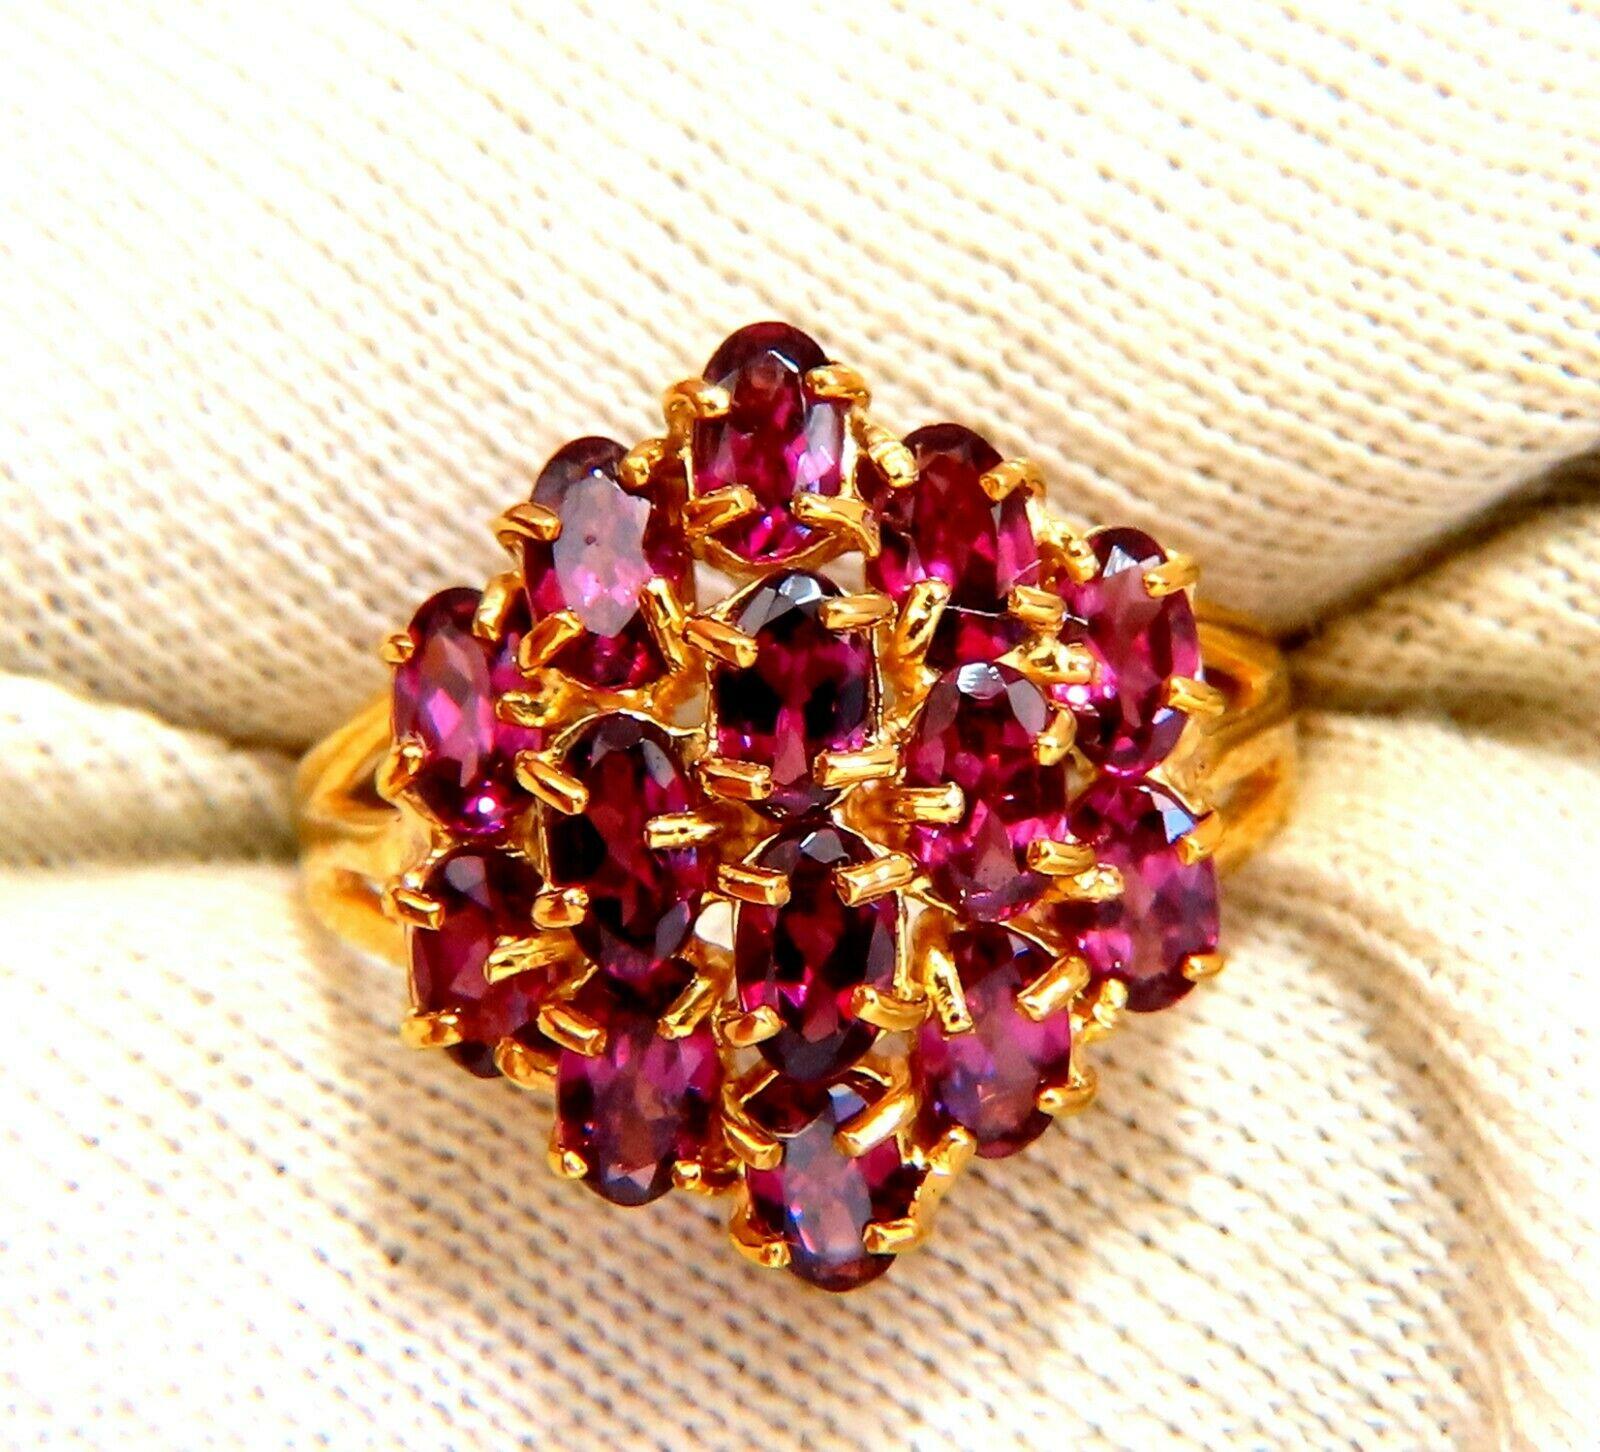 2.06ct natural oval garnet cluster ring.

Dome mounted cocktail raised.

Clean clarity vivid red and transparent.

Ring is 19 mm wide

7 mm depth.

10 karat yellow gold 4.3 grams

Size 10 and we may resize.